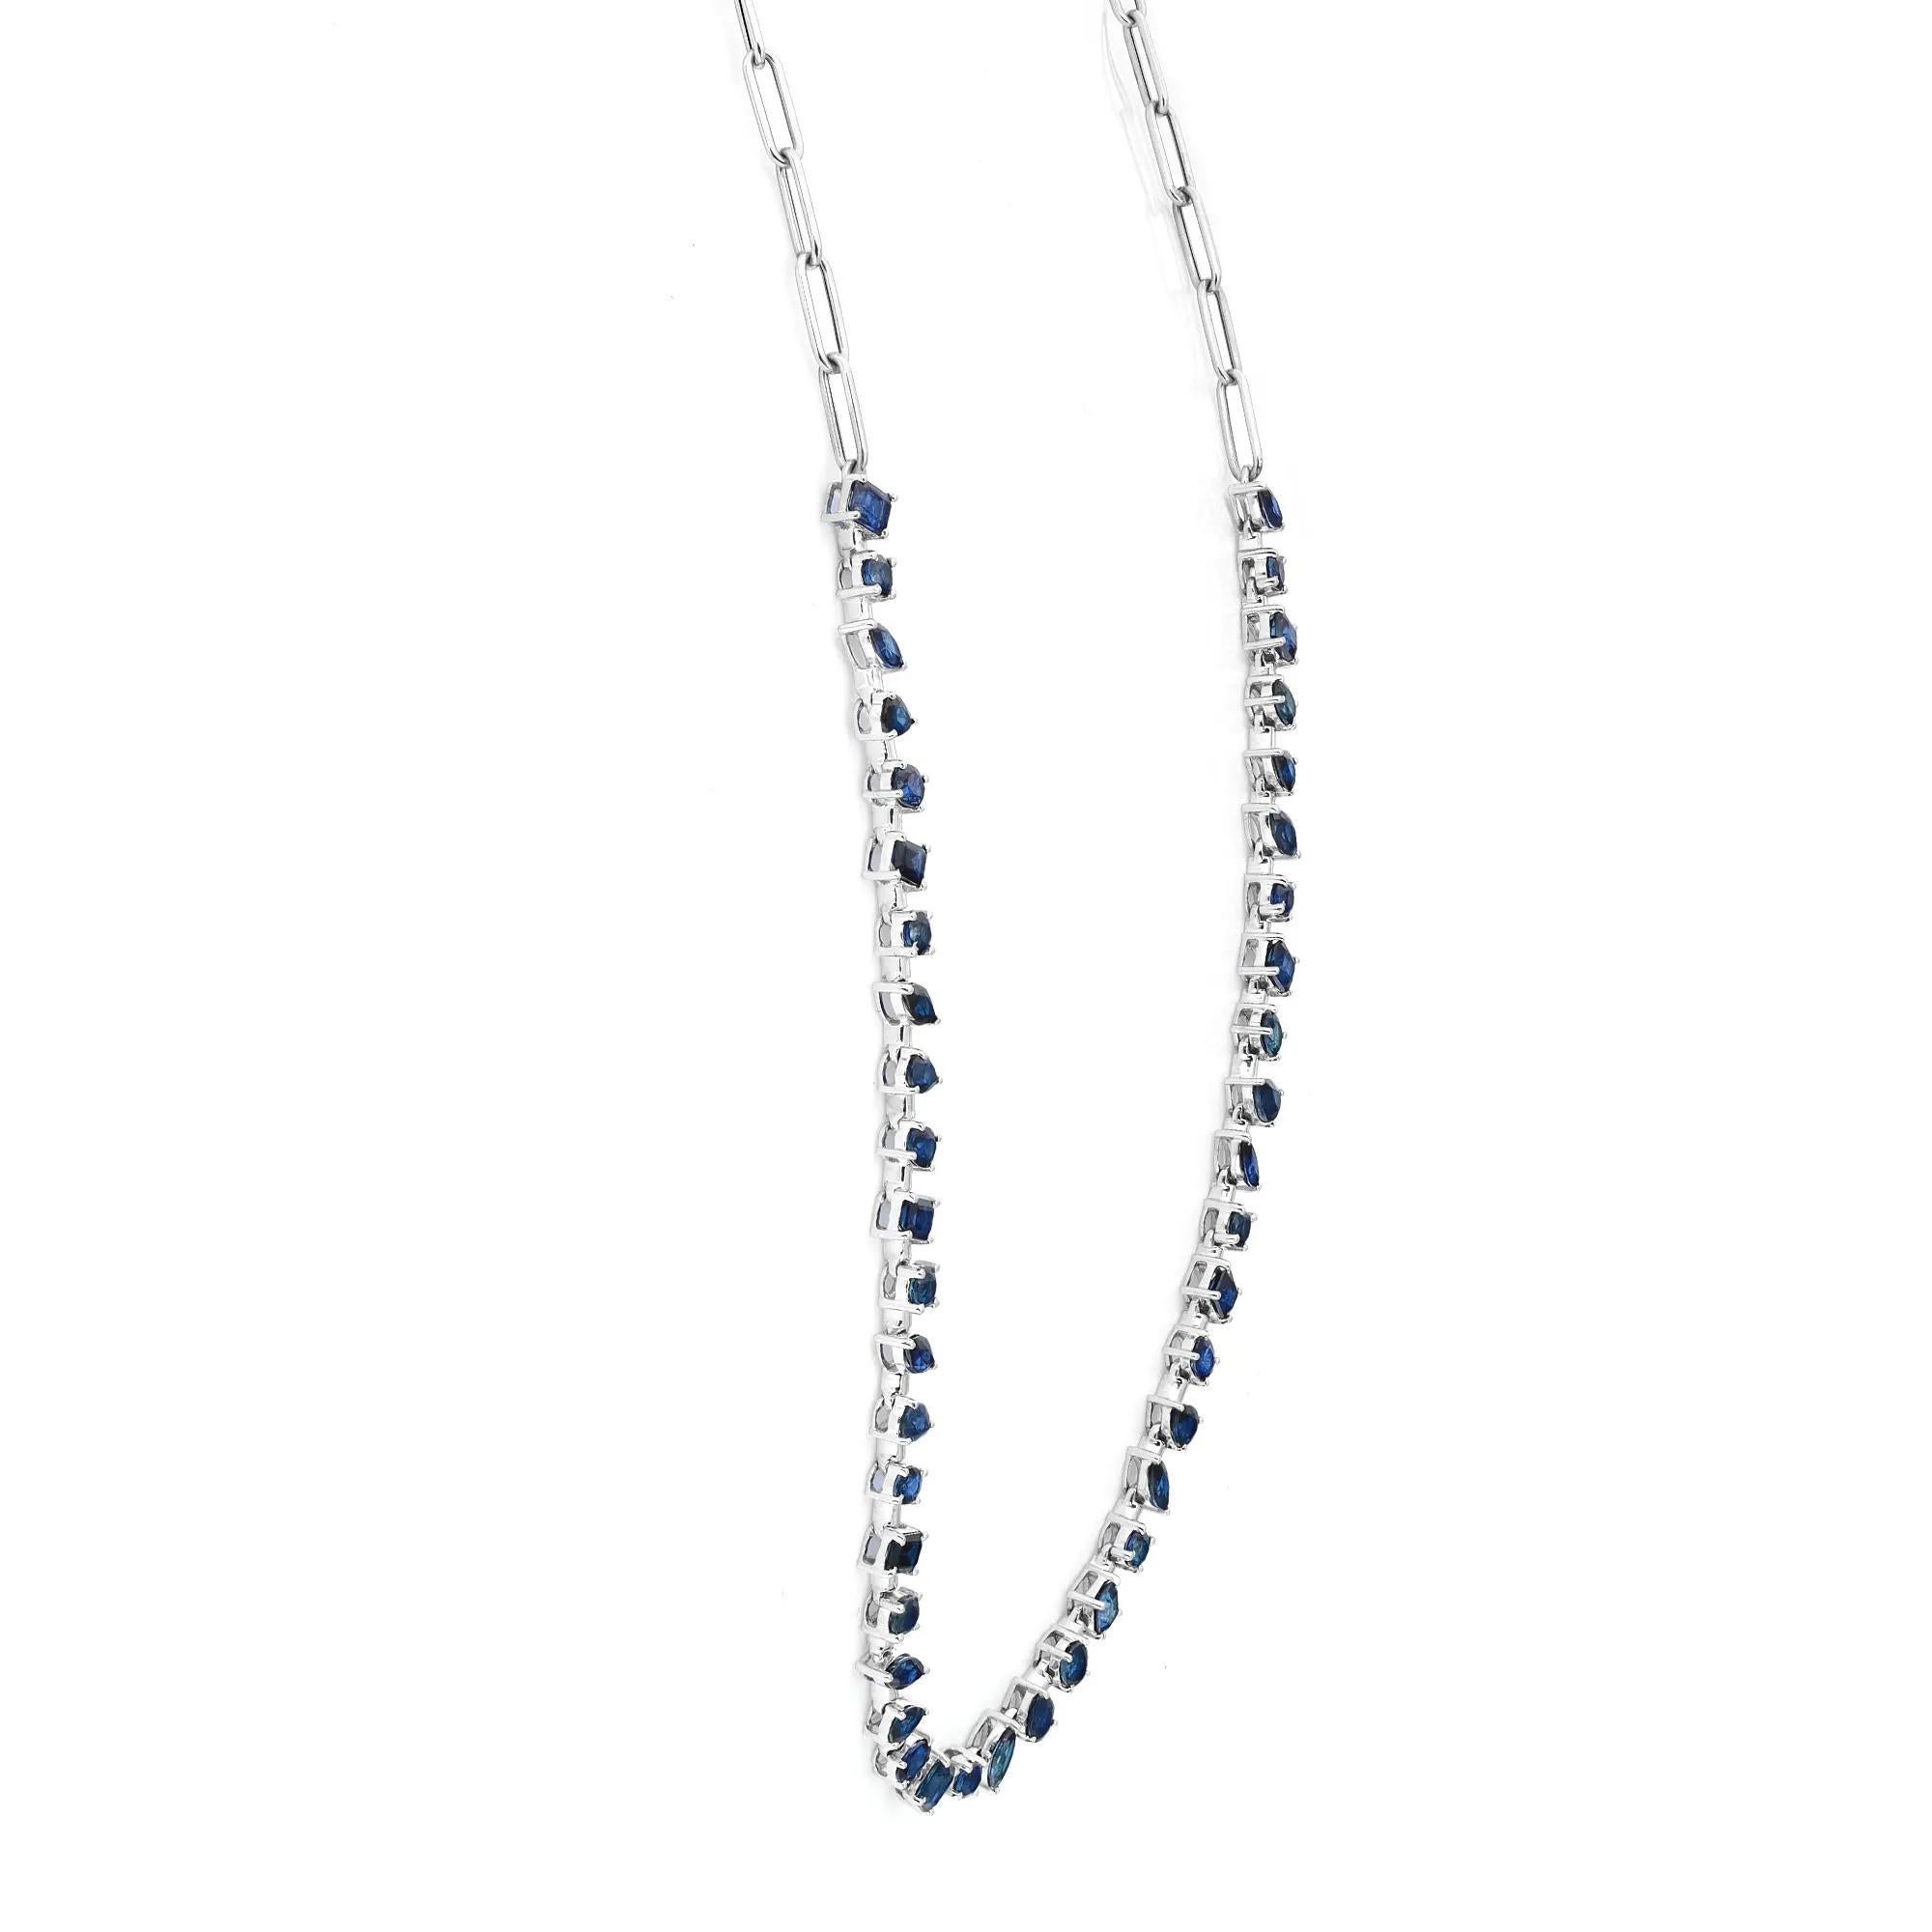 Show off your unique style with this gorgeous multi-shaped blue sapphire tennis necklace. This necklace features 43 marquise, round, pear, oval, and emerald-shaped blue sapphires, each set at equal distances in a prong setting enhanced with a paper